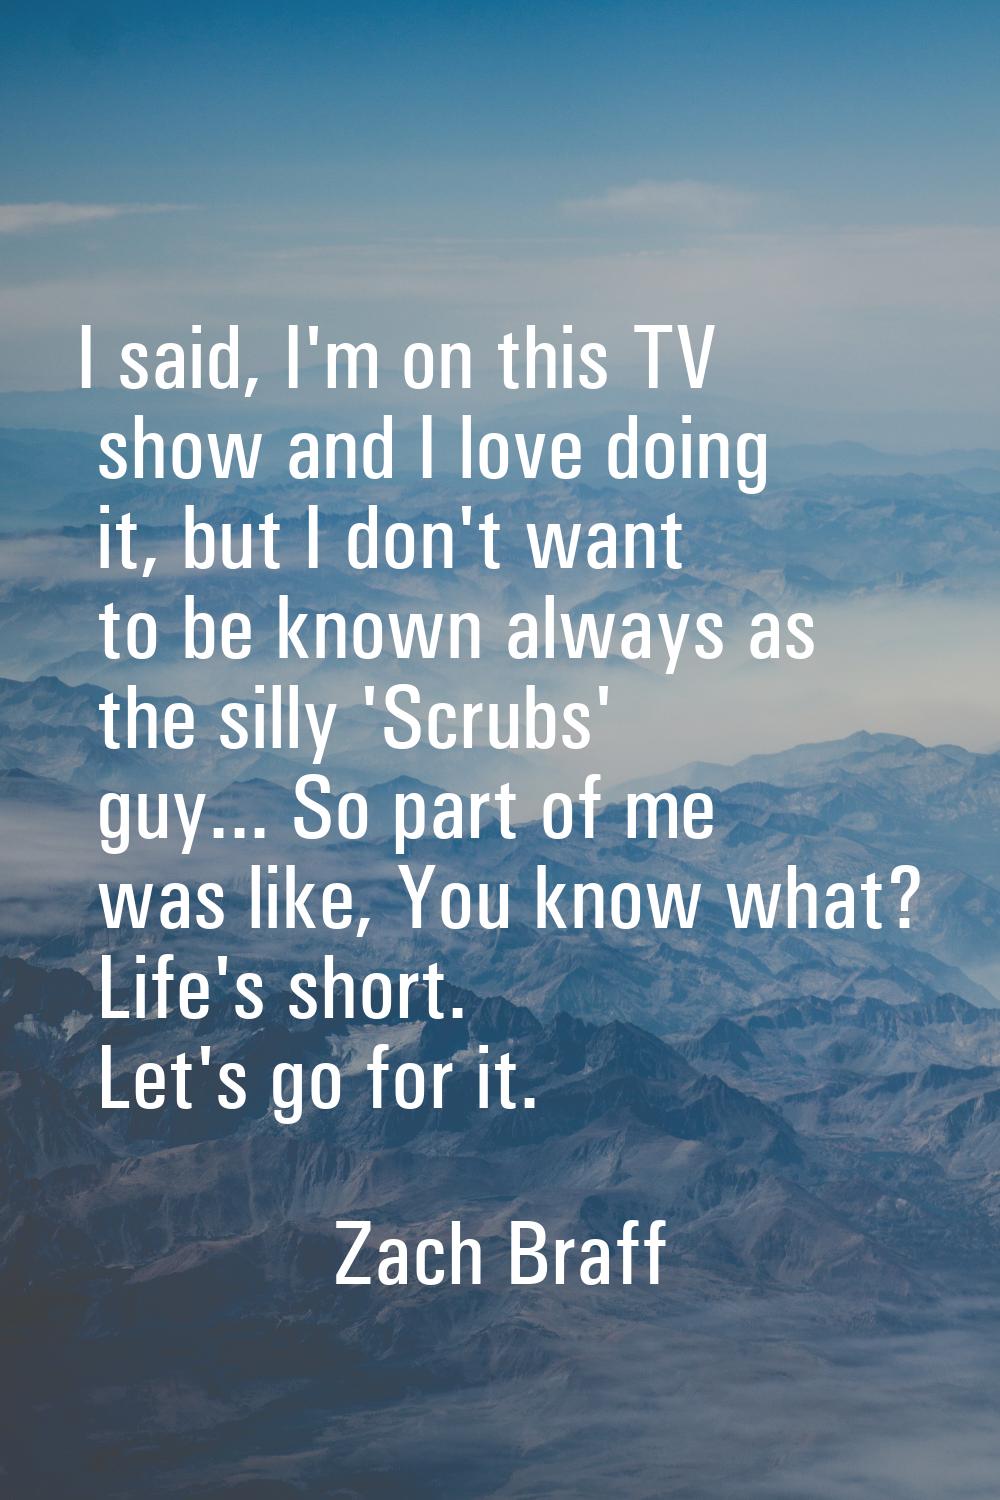 I said, I'm on this TV show and I love doing it, but I don't want to be known always as the silly '